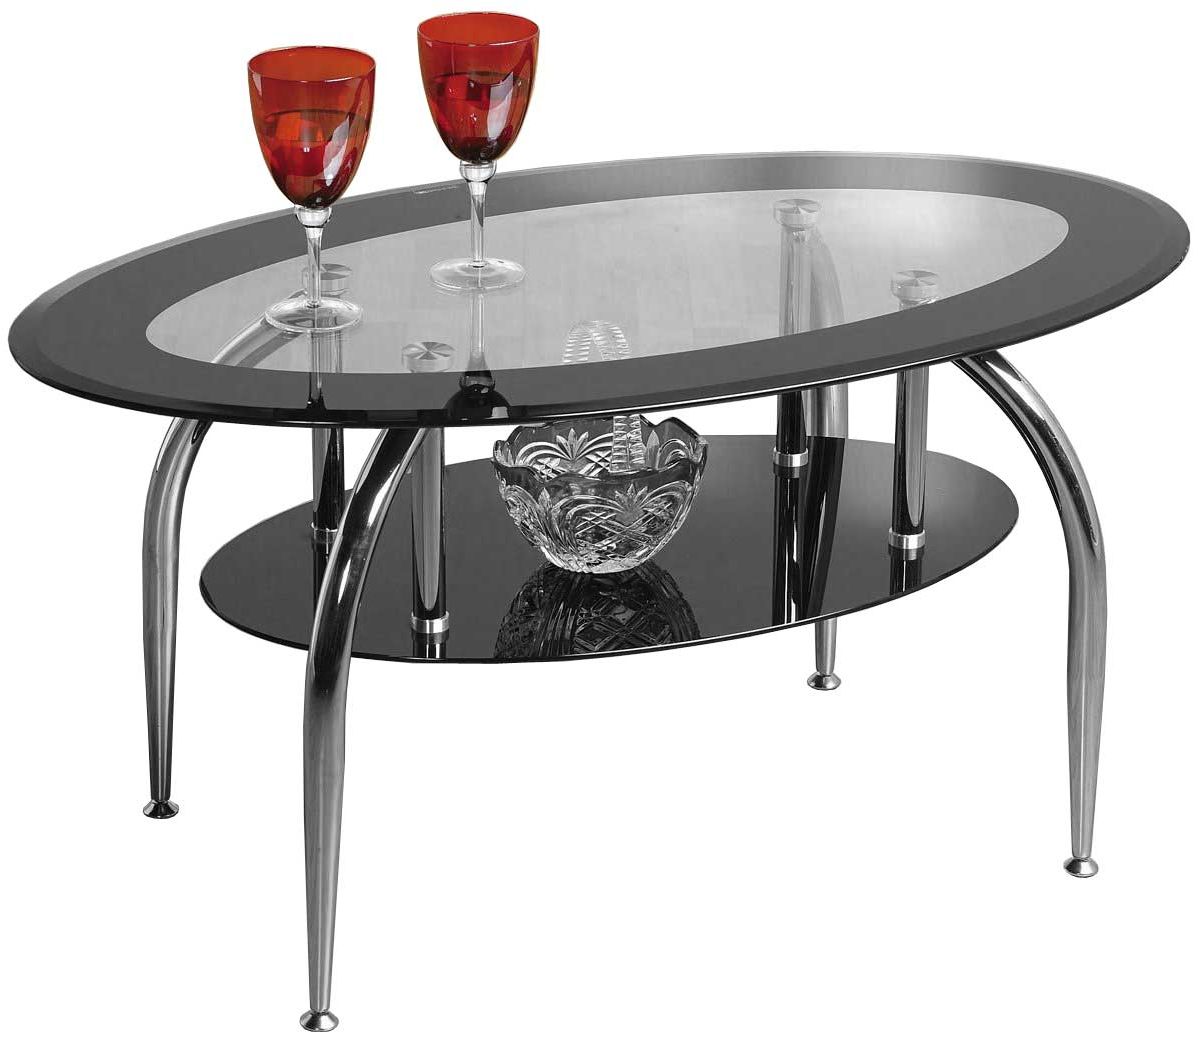 Caravelle Black Glass Coffee Table With Chrome Legs Inside Most Recent Chrome Coffee Tables (View 6 of 10)